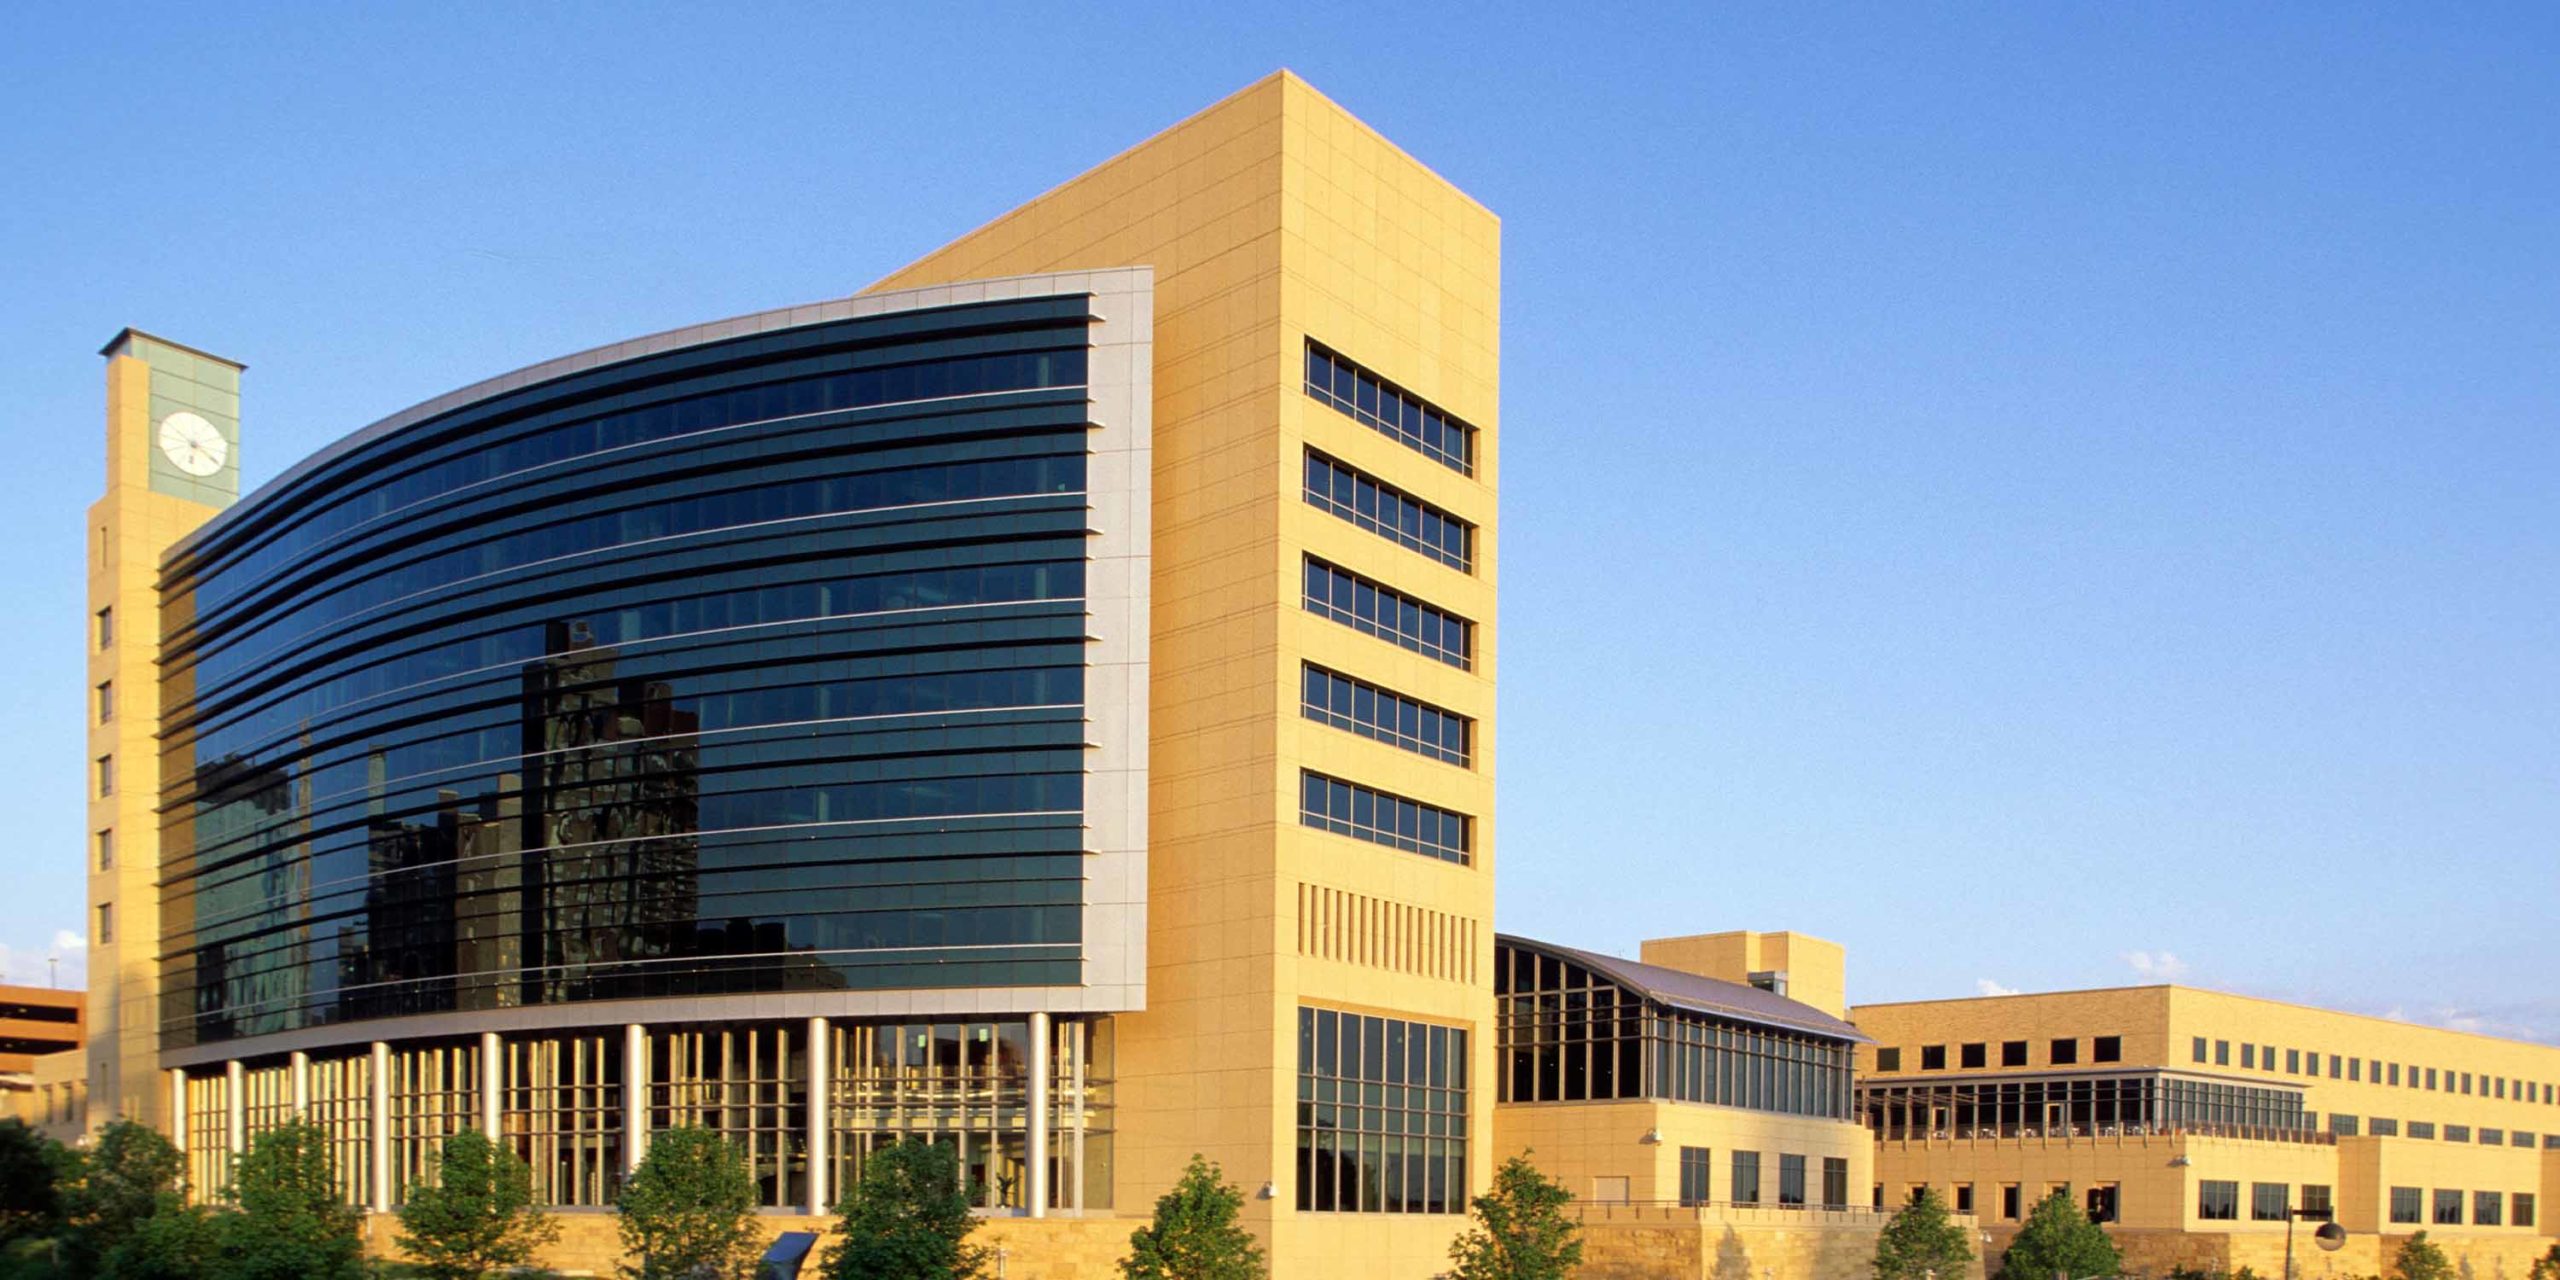 Federal Reserve Bank of Minneapolis Headquarters and Operations Center